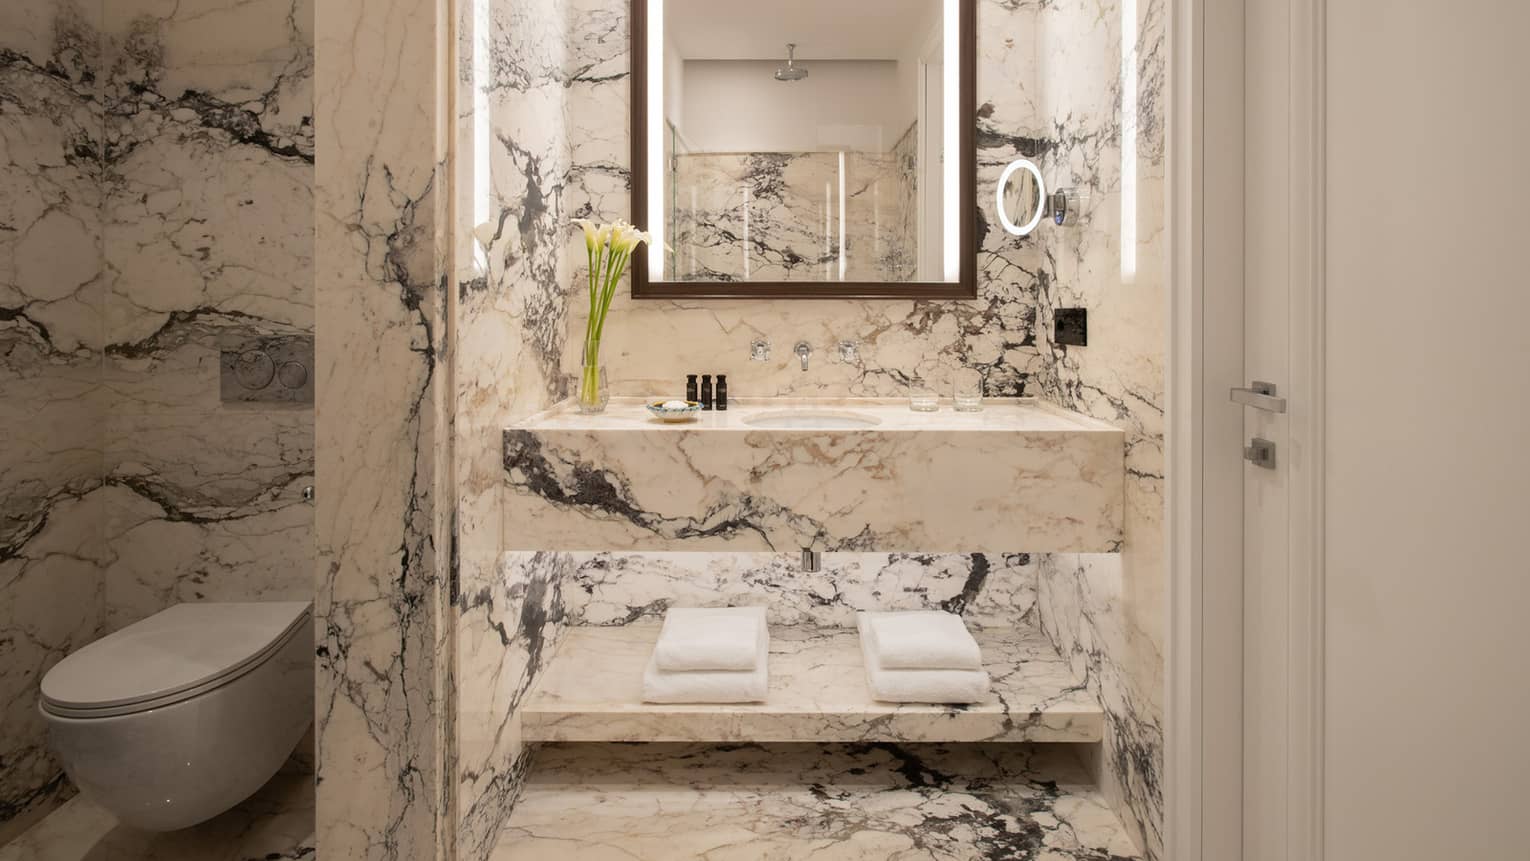 Bathroom with black and white marble walls and vanity, illuminated mirror, separated toilet room